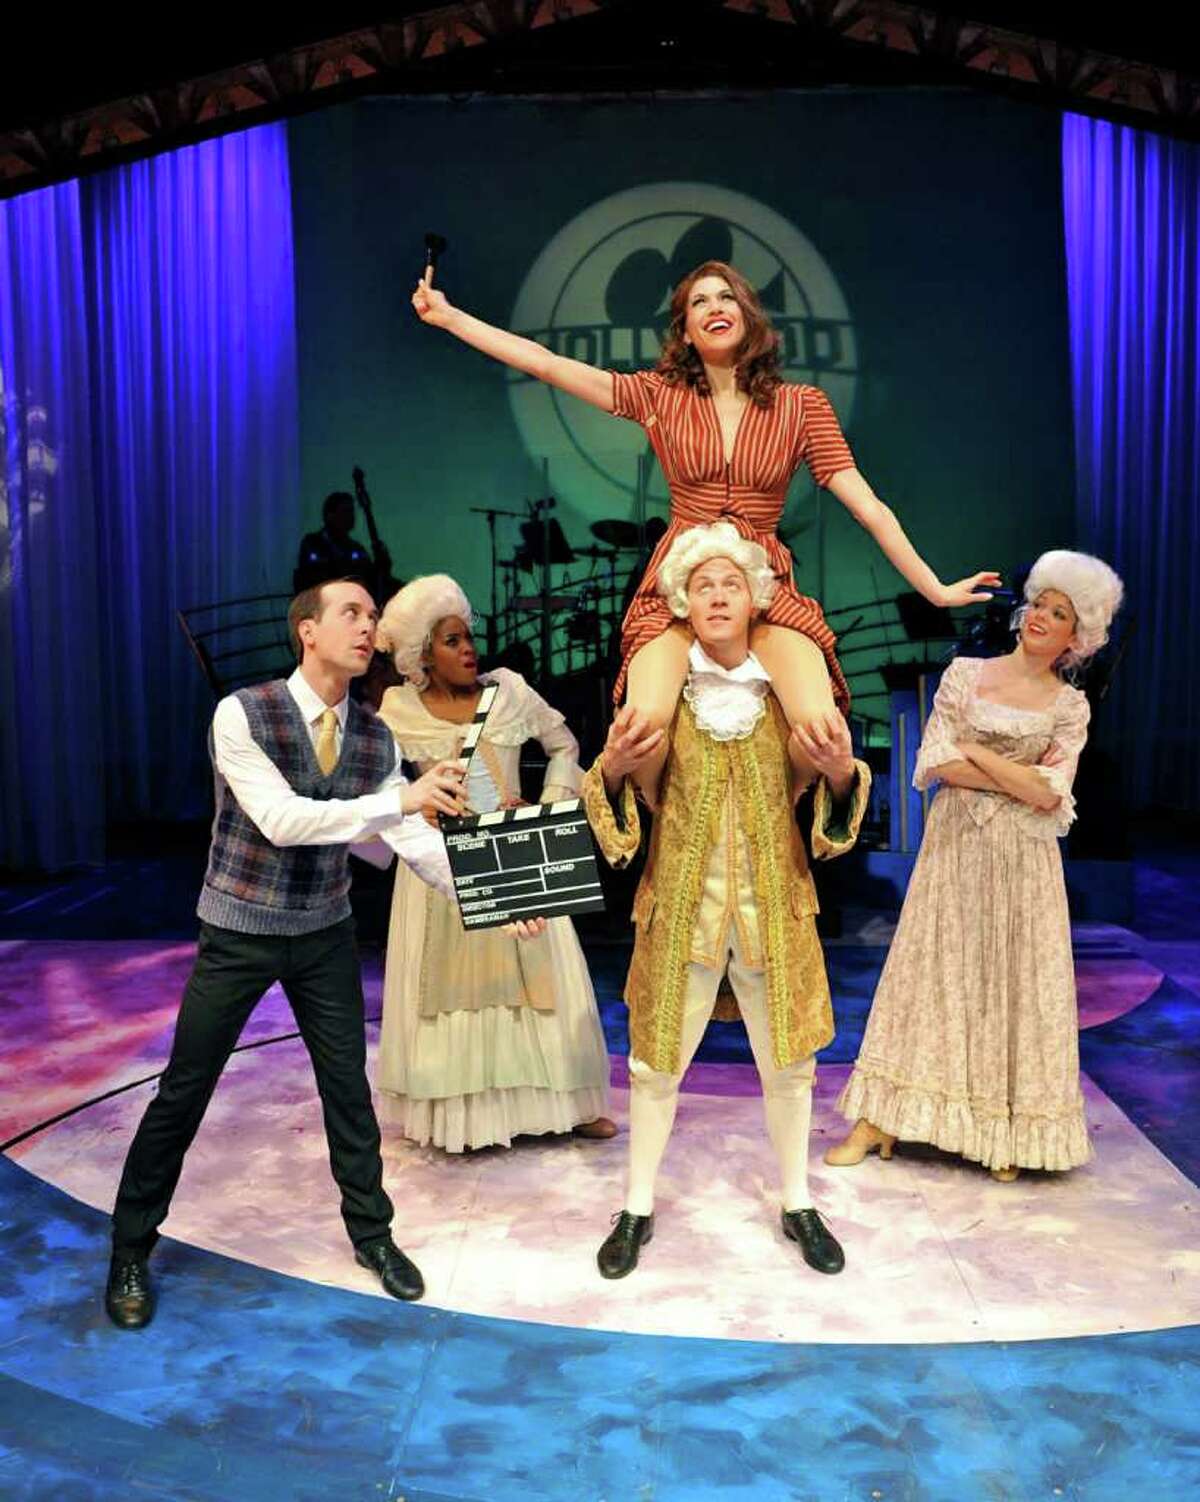 "'S Wonderful" is on stage at Westchester Broadway Theater in Elmsford, N.Y. Performing "Heaven on Earth," clockwise from left, are Blakely Slaybaugh, Mary Millben, Stacey Harris (in the air), Deidre Haren, and Sean Watkins.